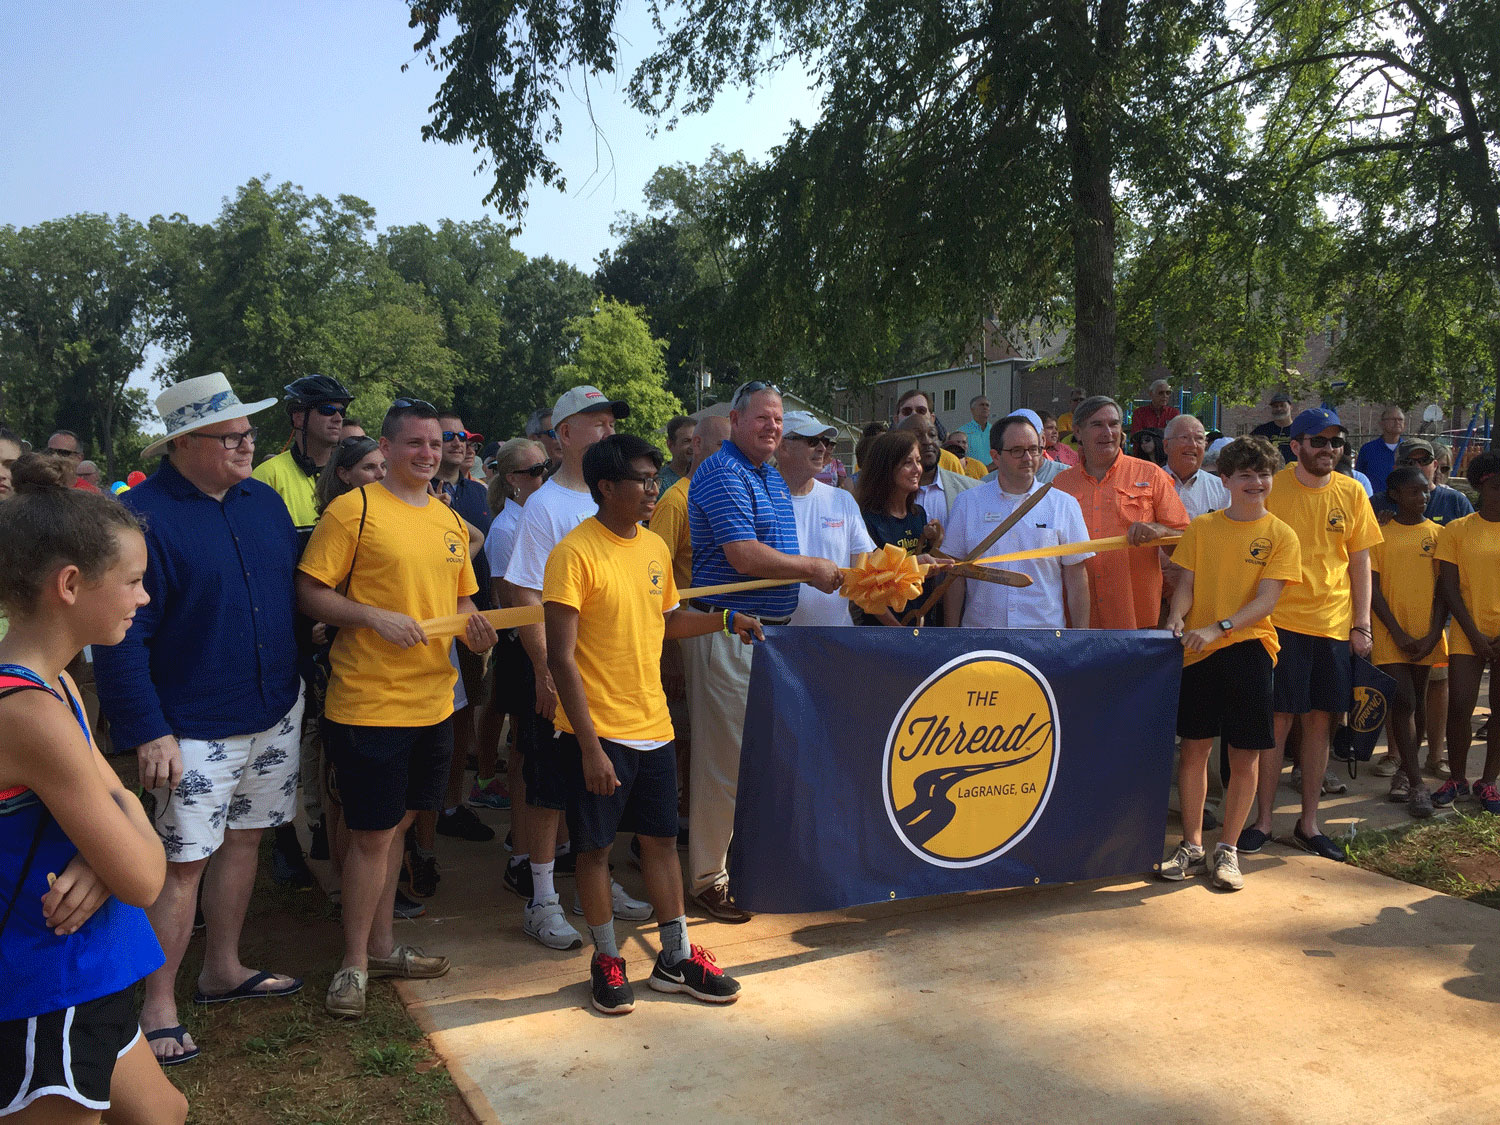  The city and Friends of Thread group celebrated the grand-opening of the first built trail segment - Granger Park Thread on July 24th, 2017. 